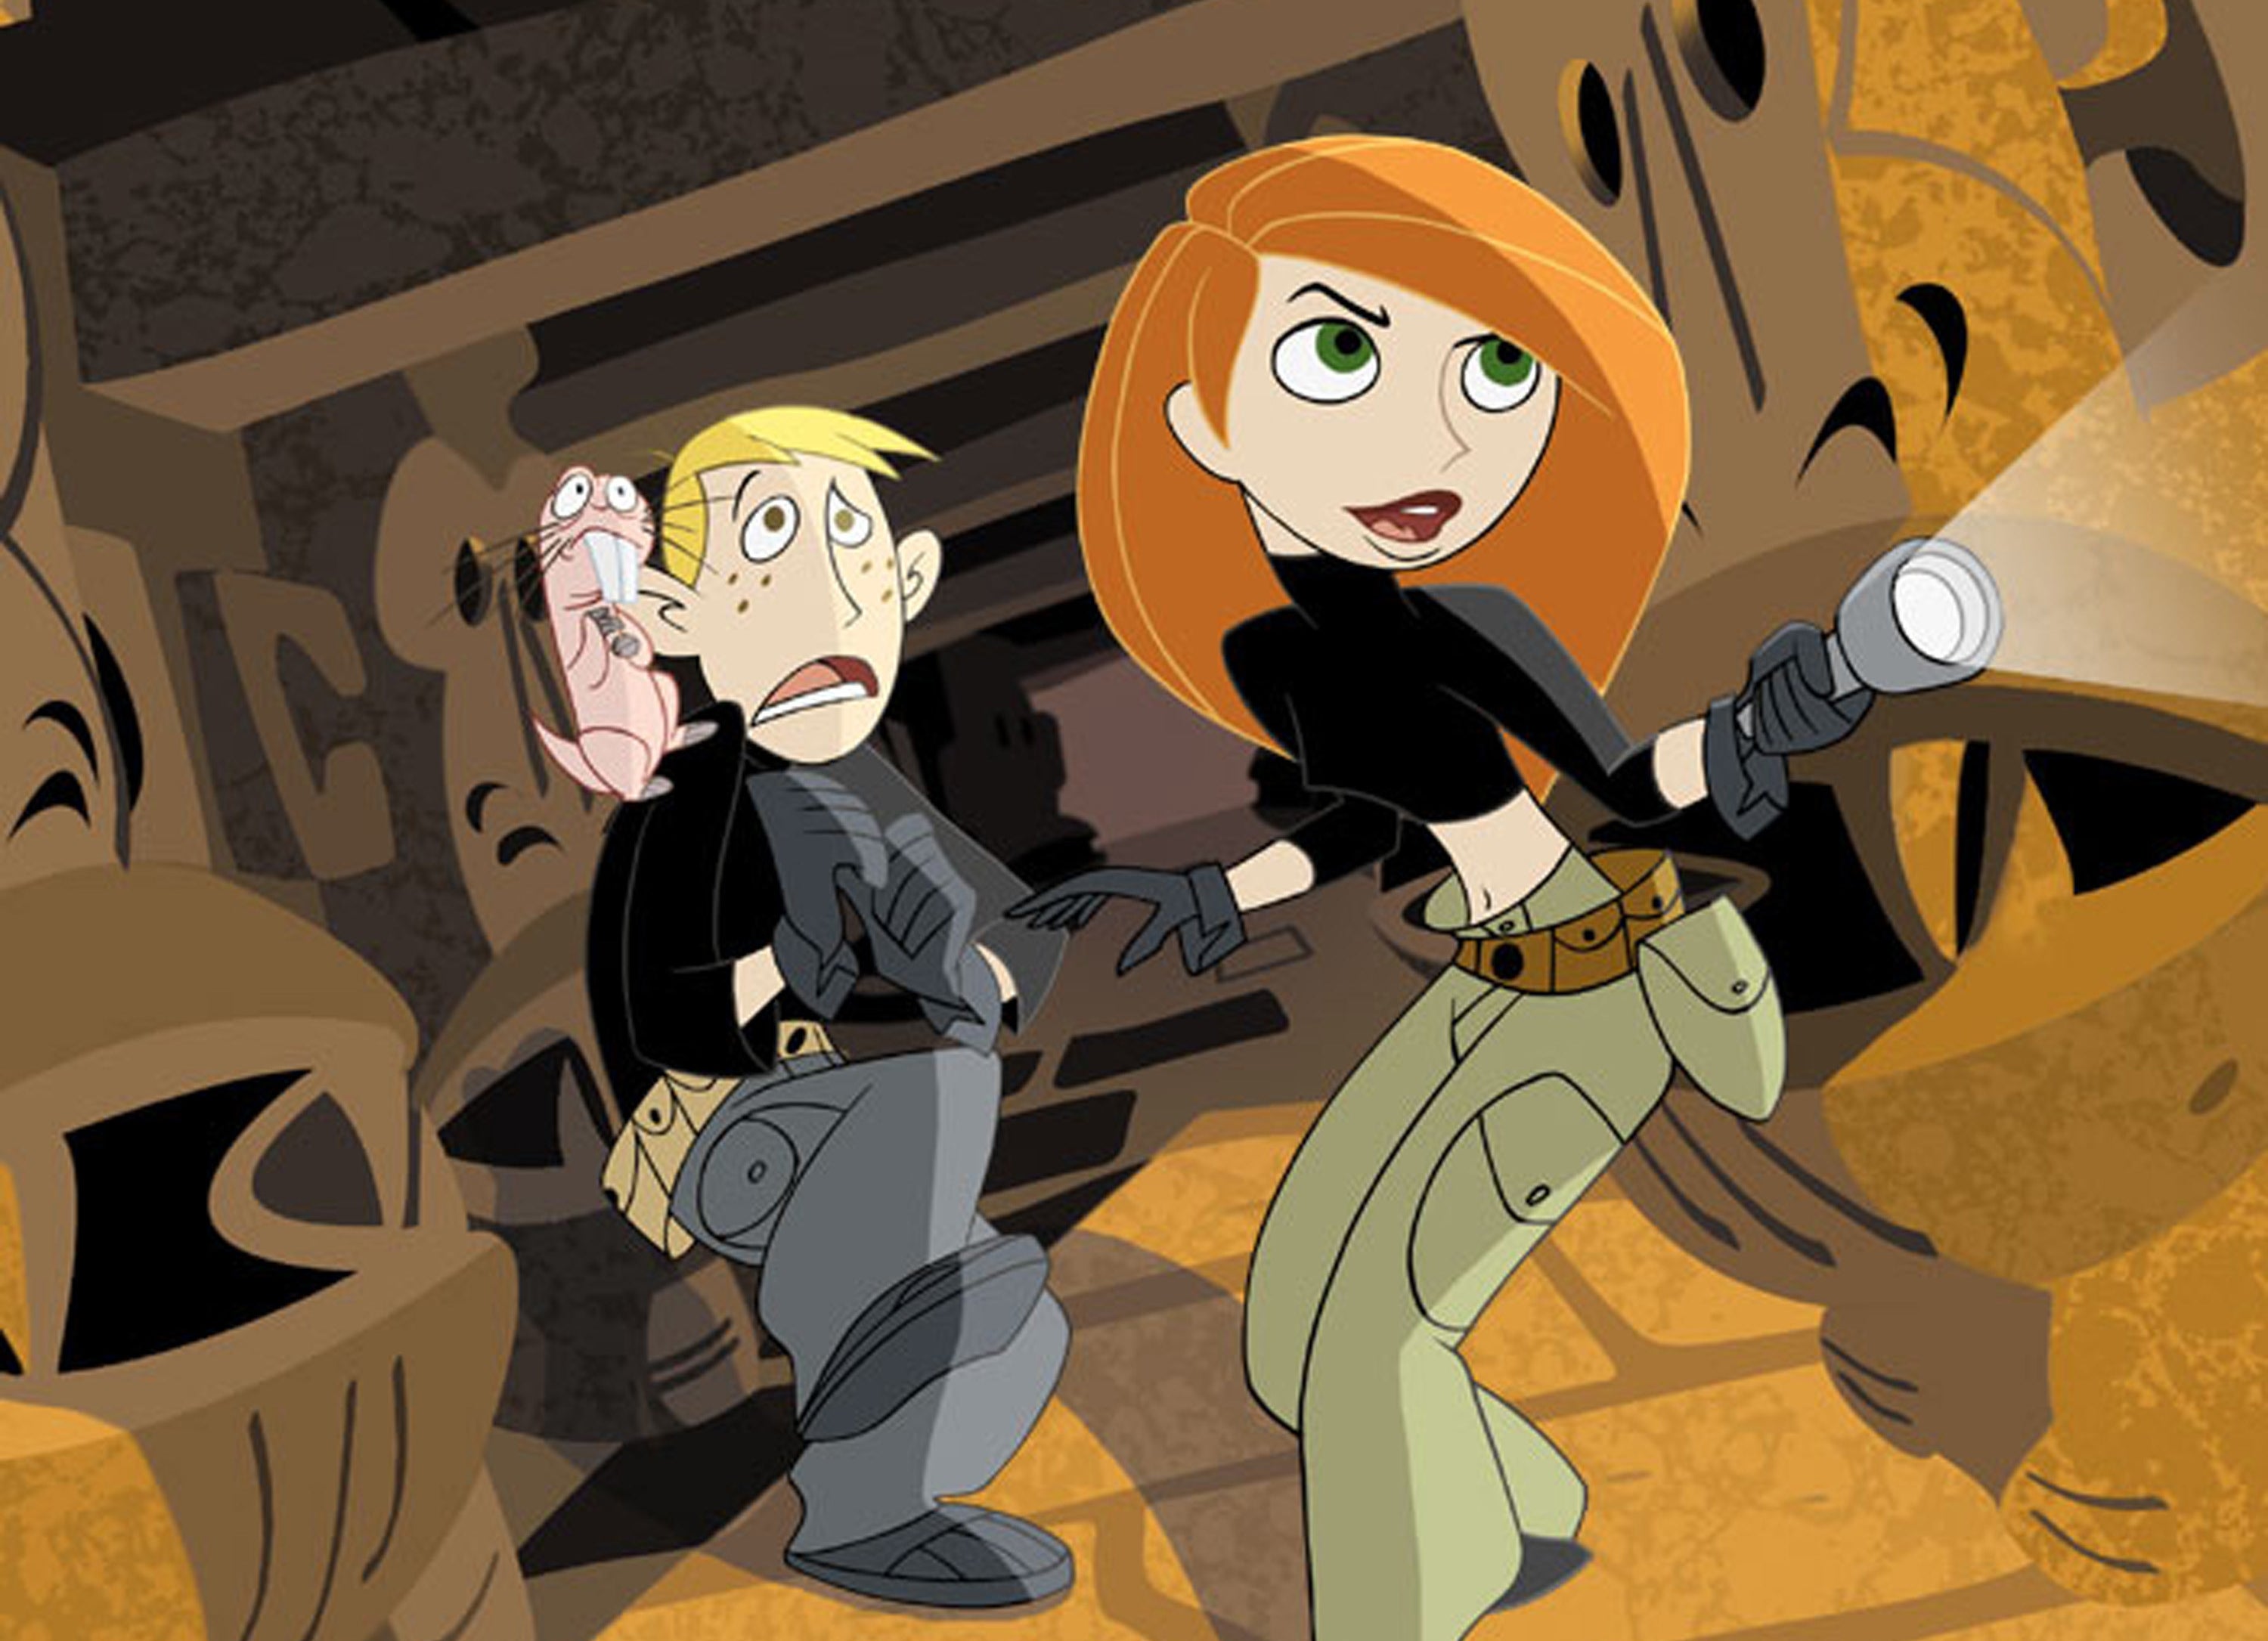 Kim Possible and Ron Stoppable walk down a hallway